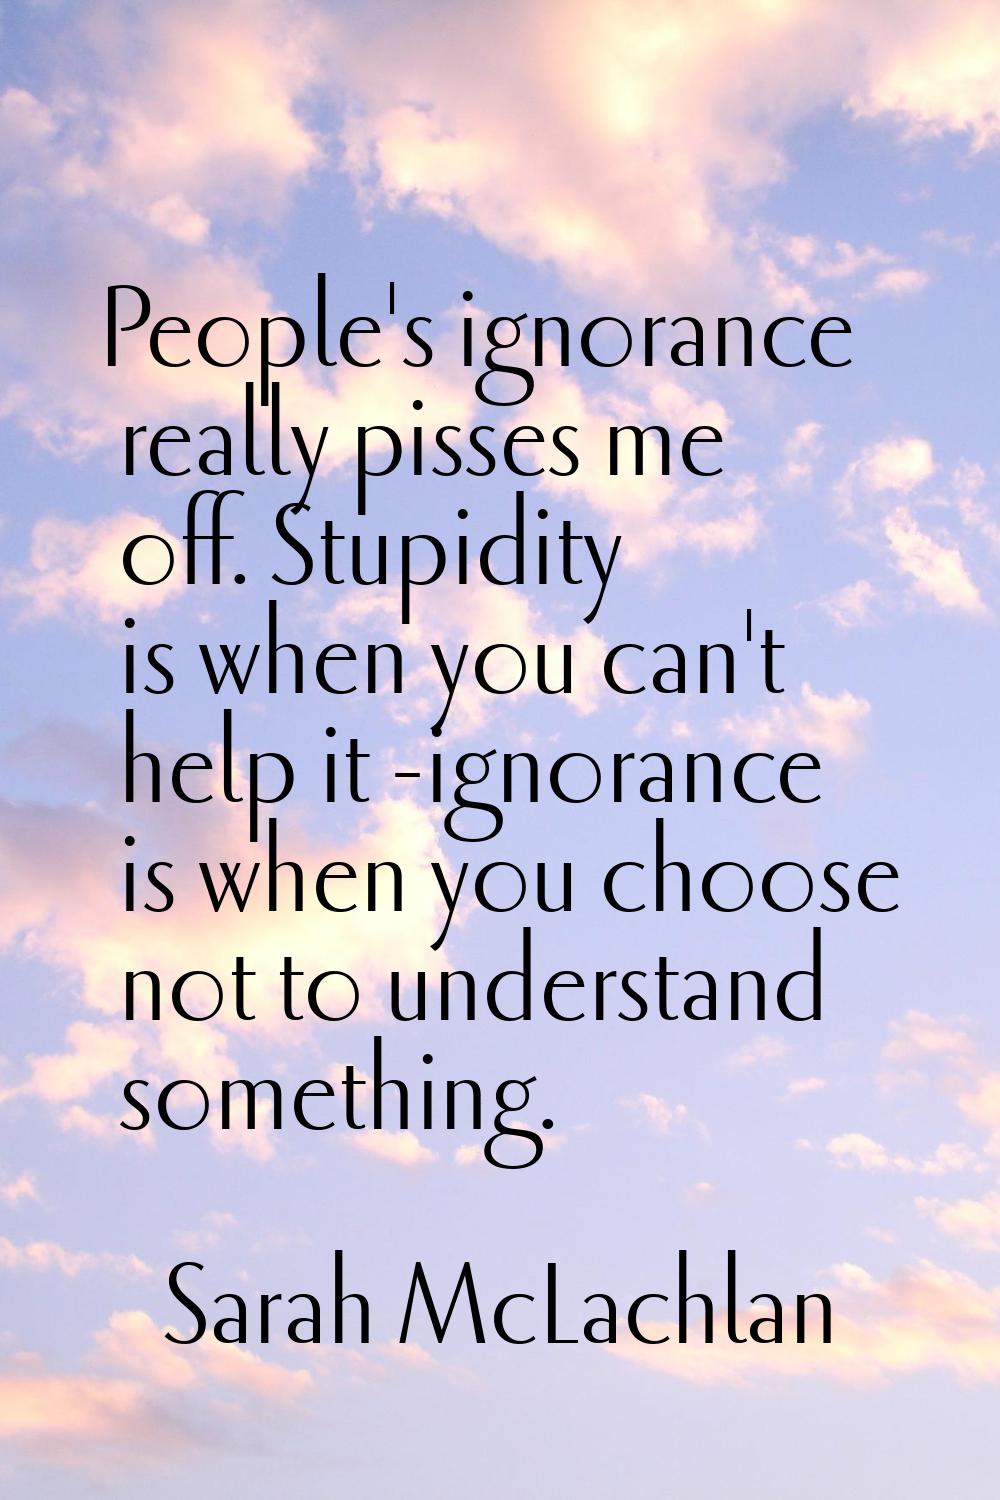 People's ignorance really pisses me off. Stupidity is when you can't help it -ignorance is when you